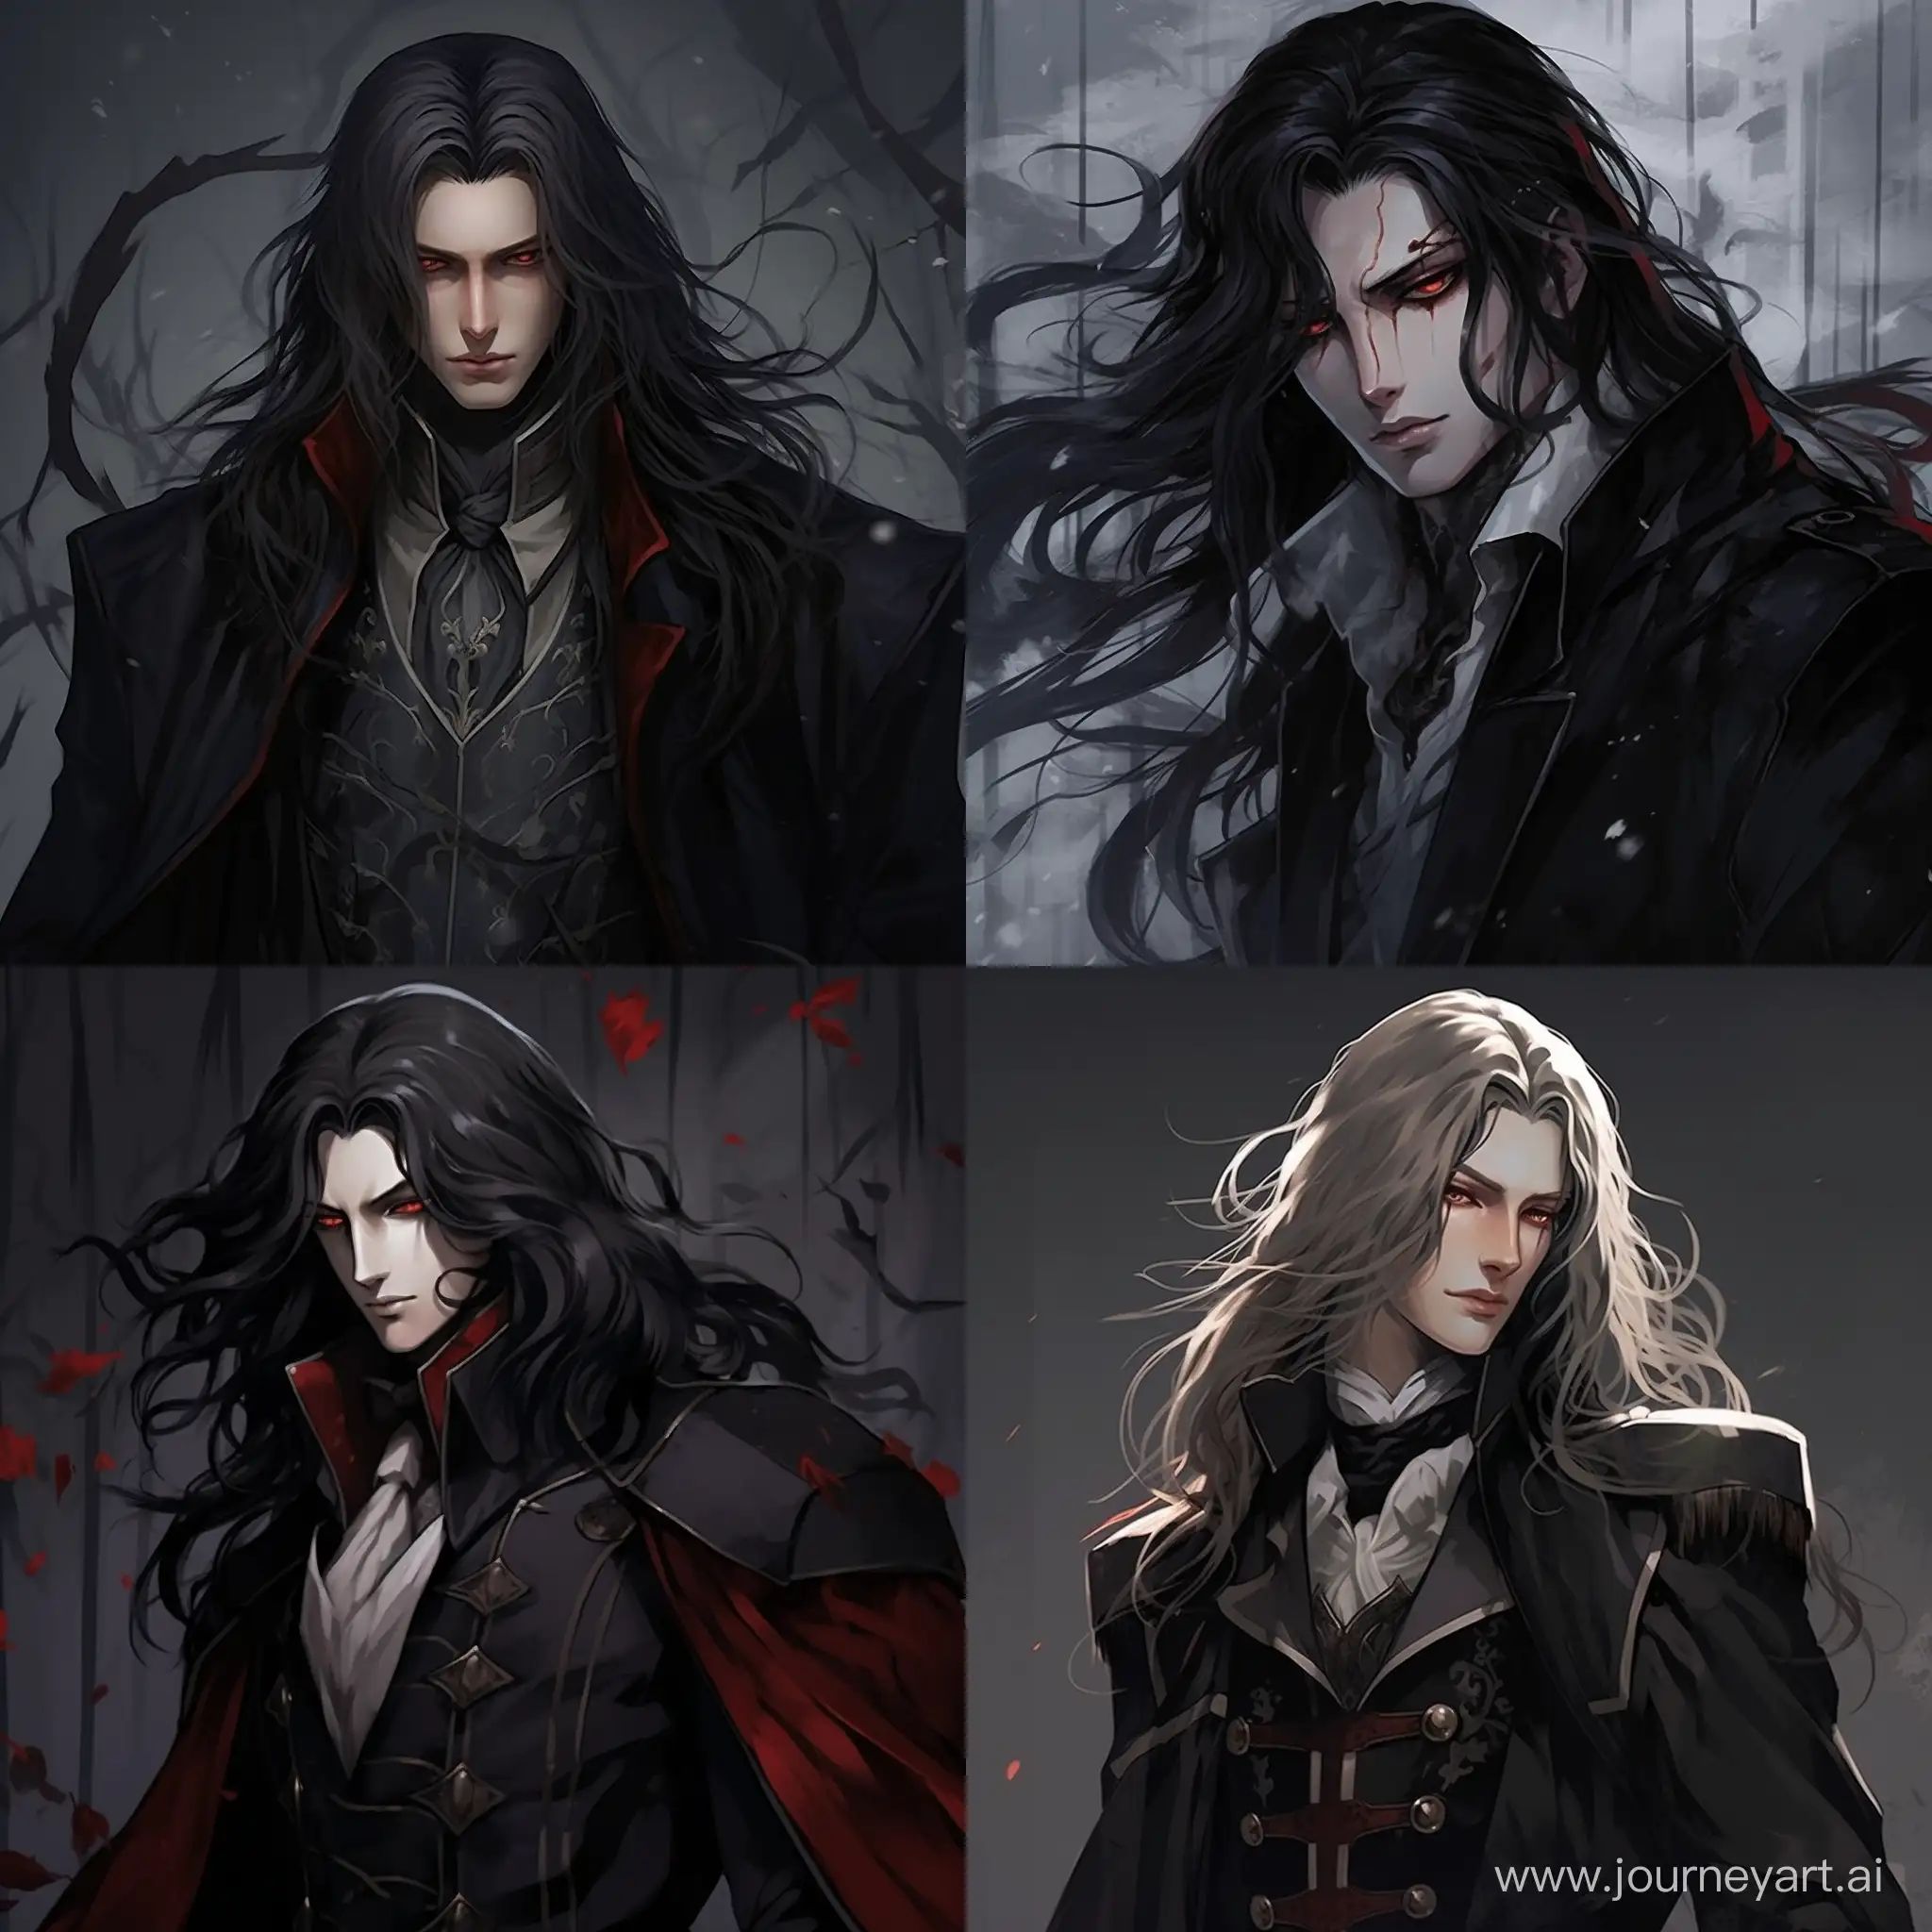 Handsome-Male-Vampire-Lord-with-Long-Hair-Alucard-Hellsing-Inspired